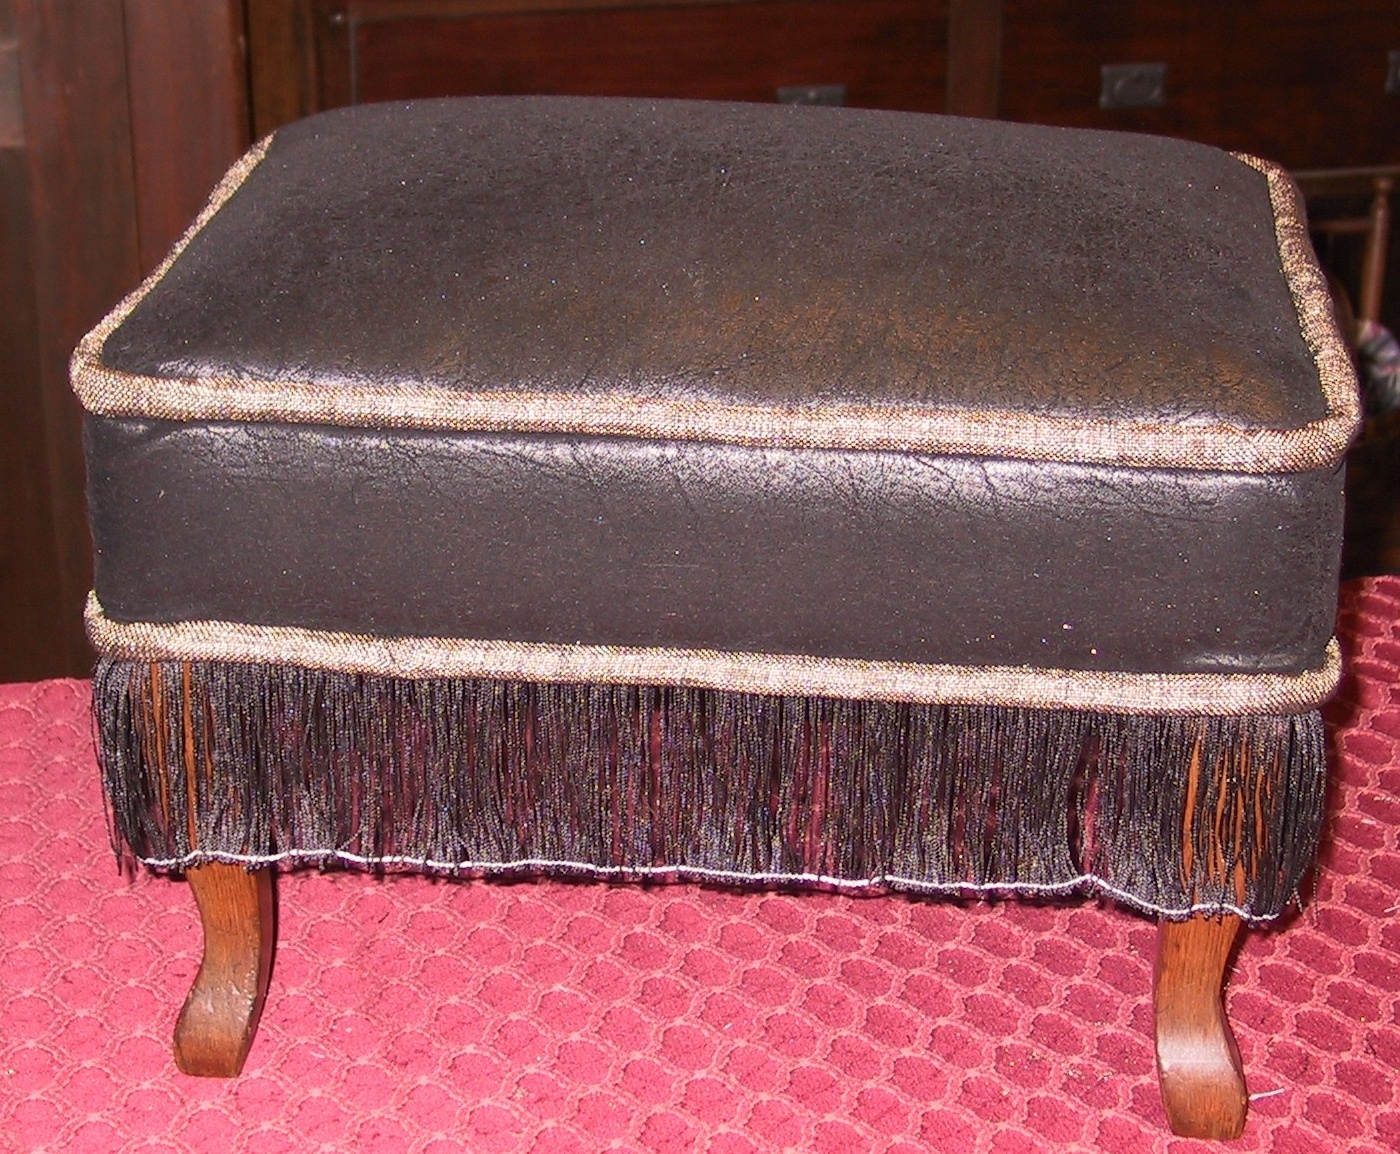 Faux-suede, chenille welt and a fine slurry transform this ottoman. Note That the string had not been removed to free the fringe yet